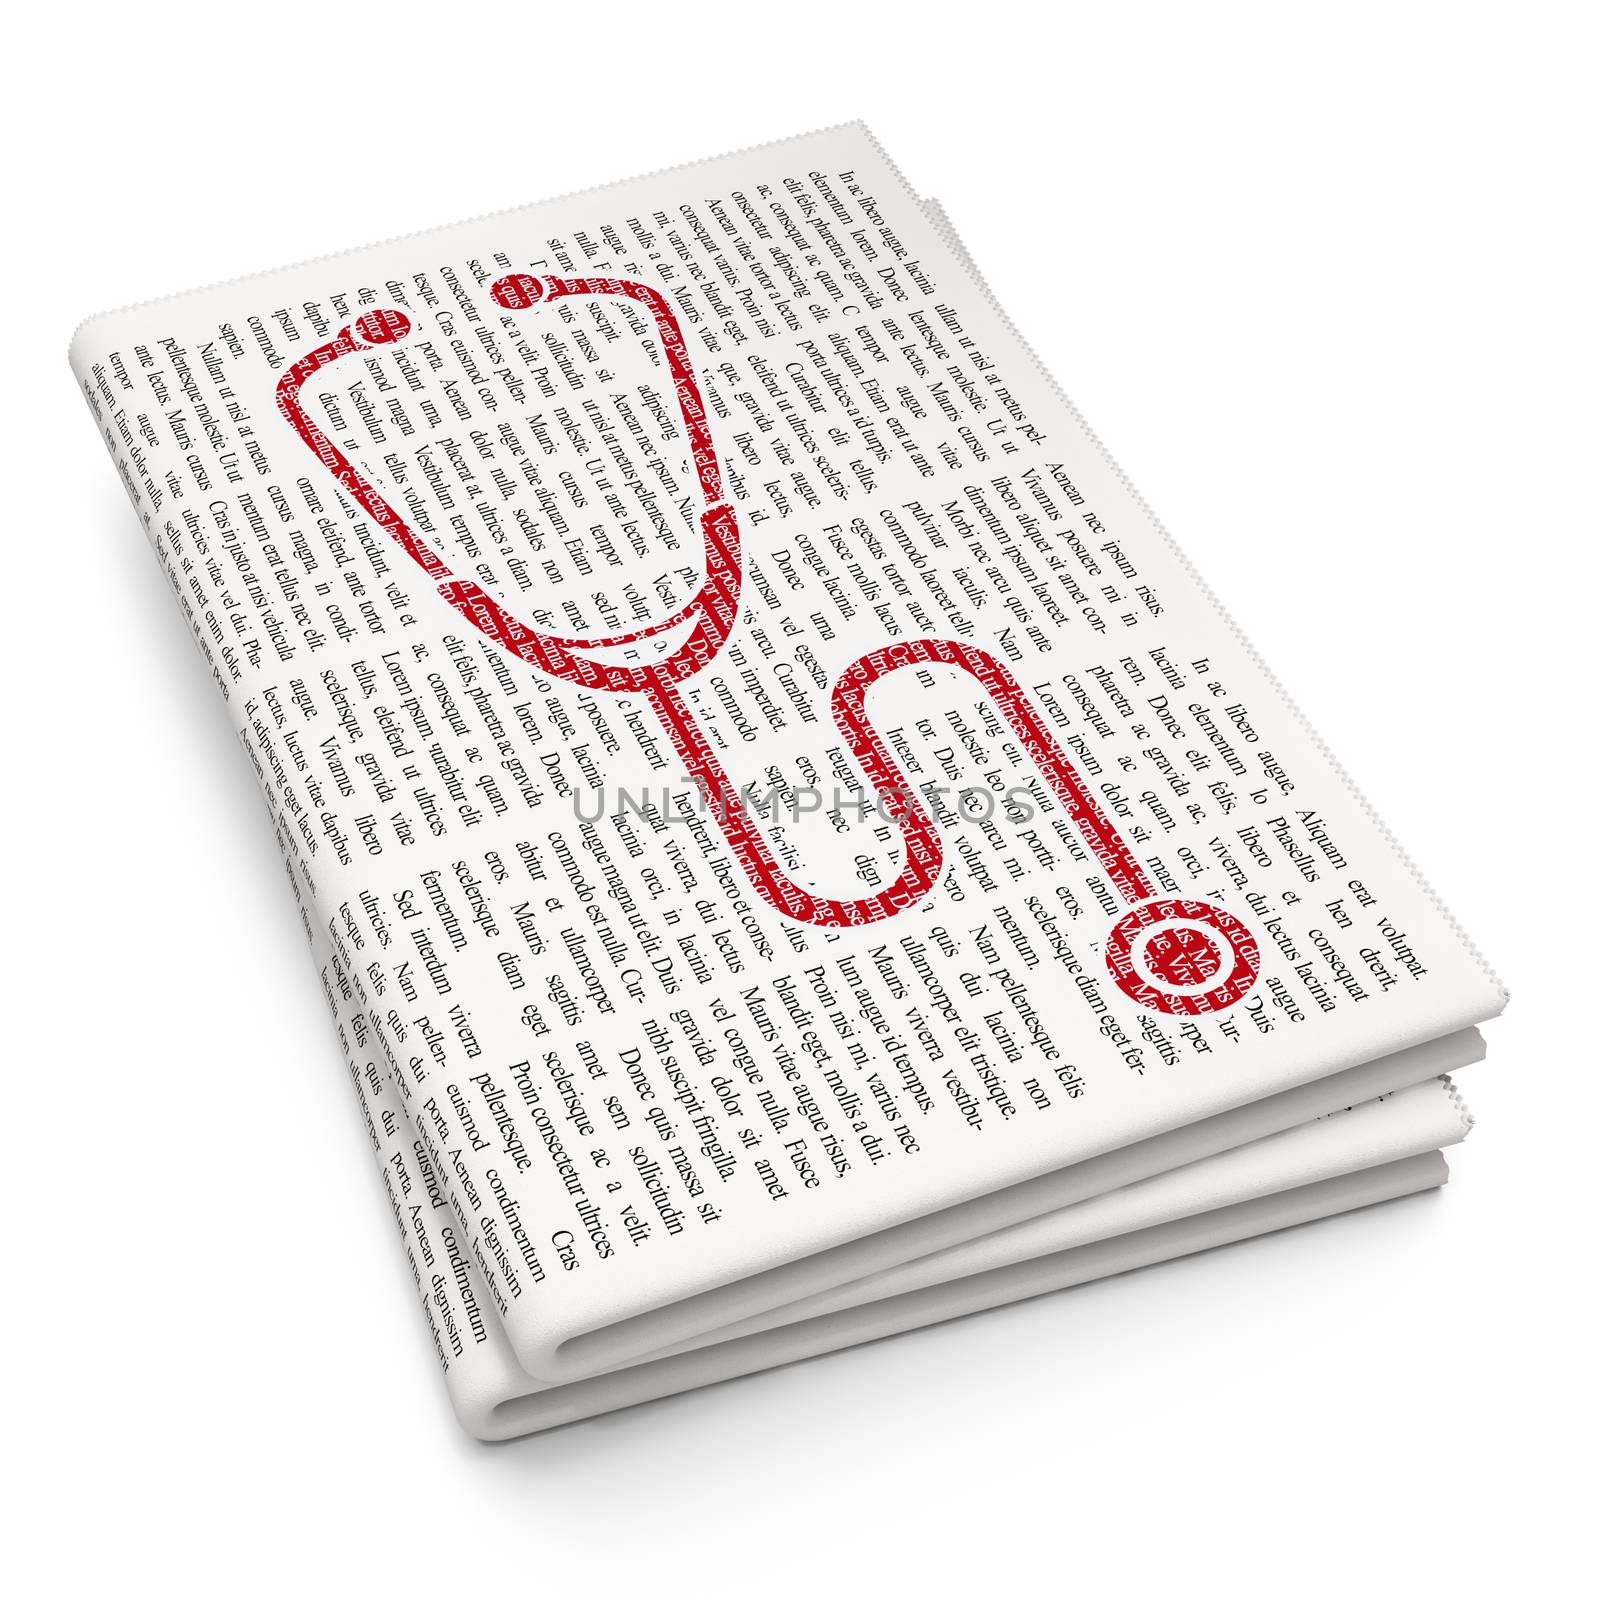 Health concept: Pixelated red Stethoscope icon on Newspaper background